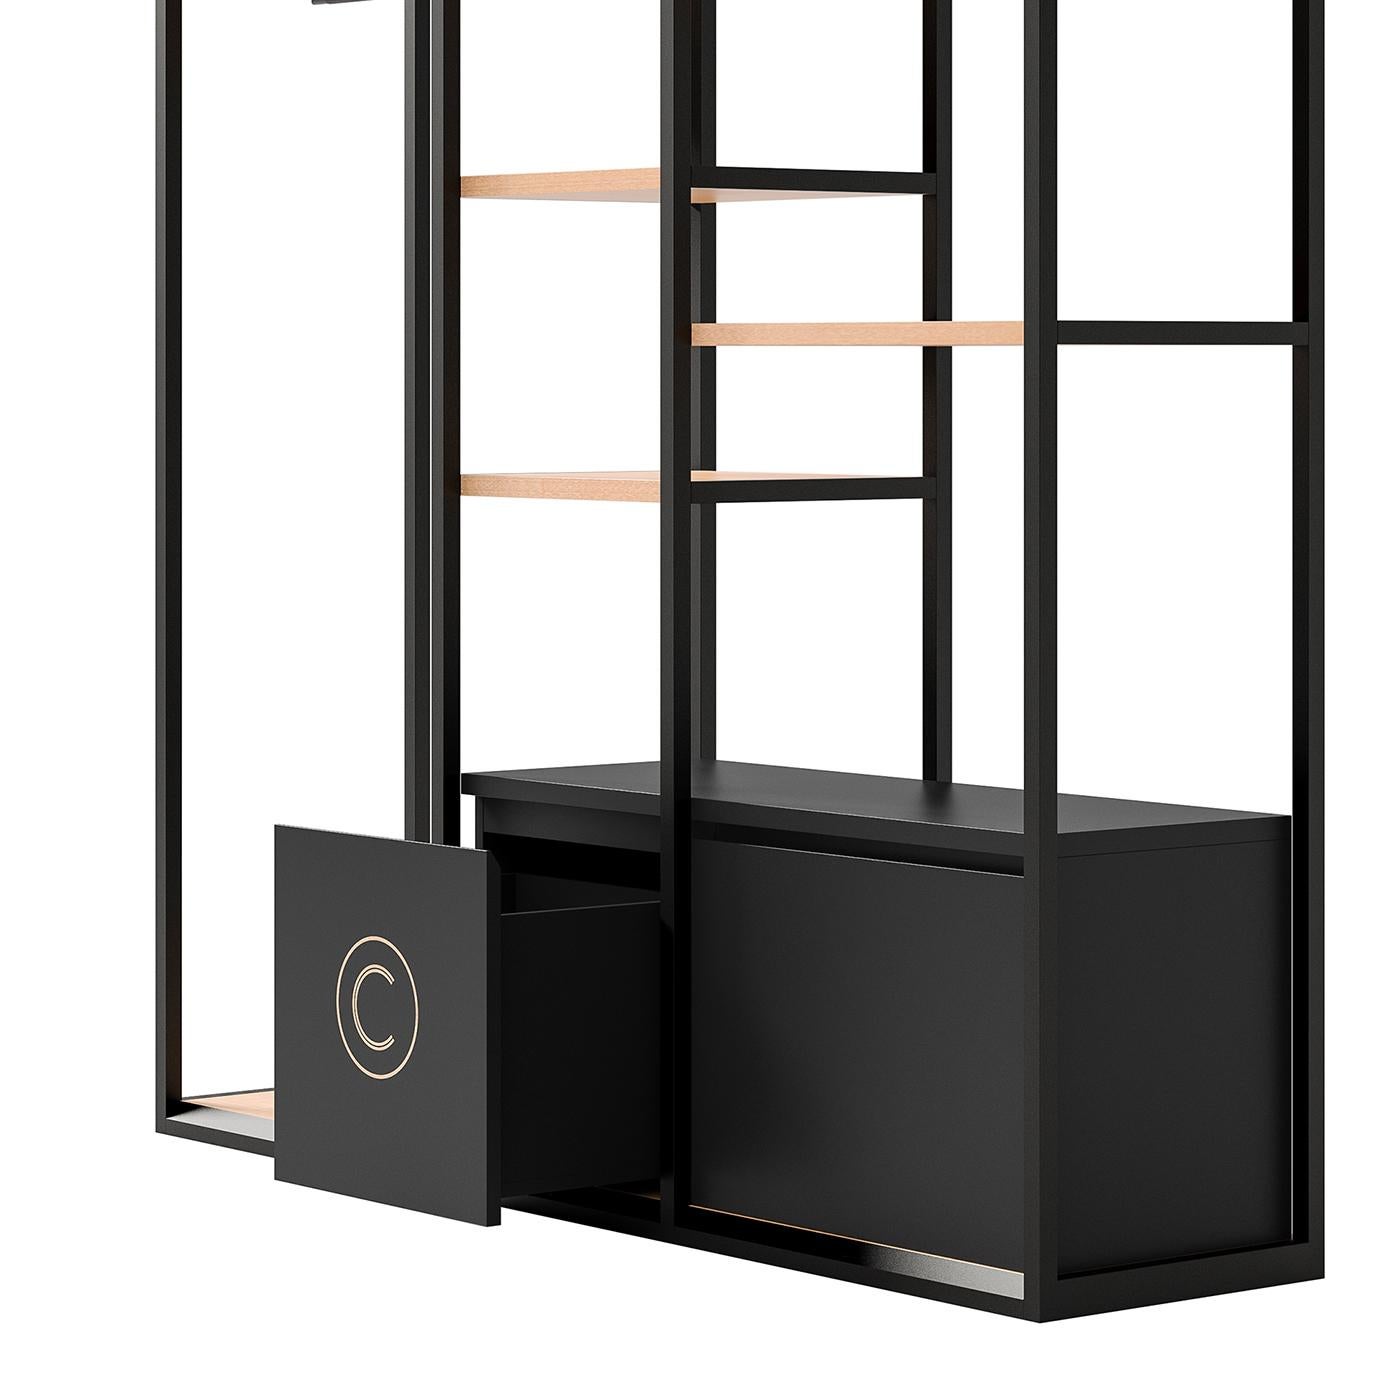 The Minimalist flair and floating appearance of this sophisticated shelving unit will add style to a modern and Minimalist bedroom. This eclectic piece is framed in black-finished metal with light veneered shelves and comprises three sections, each